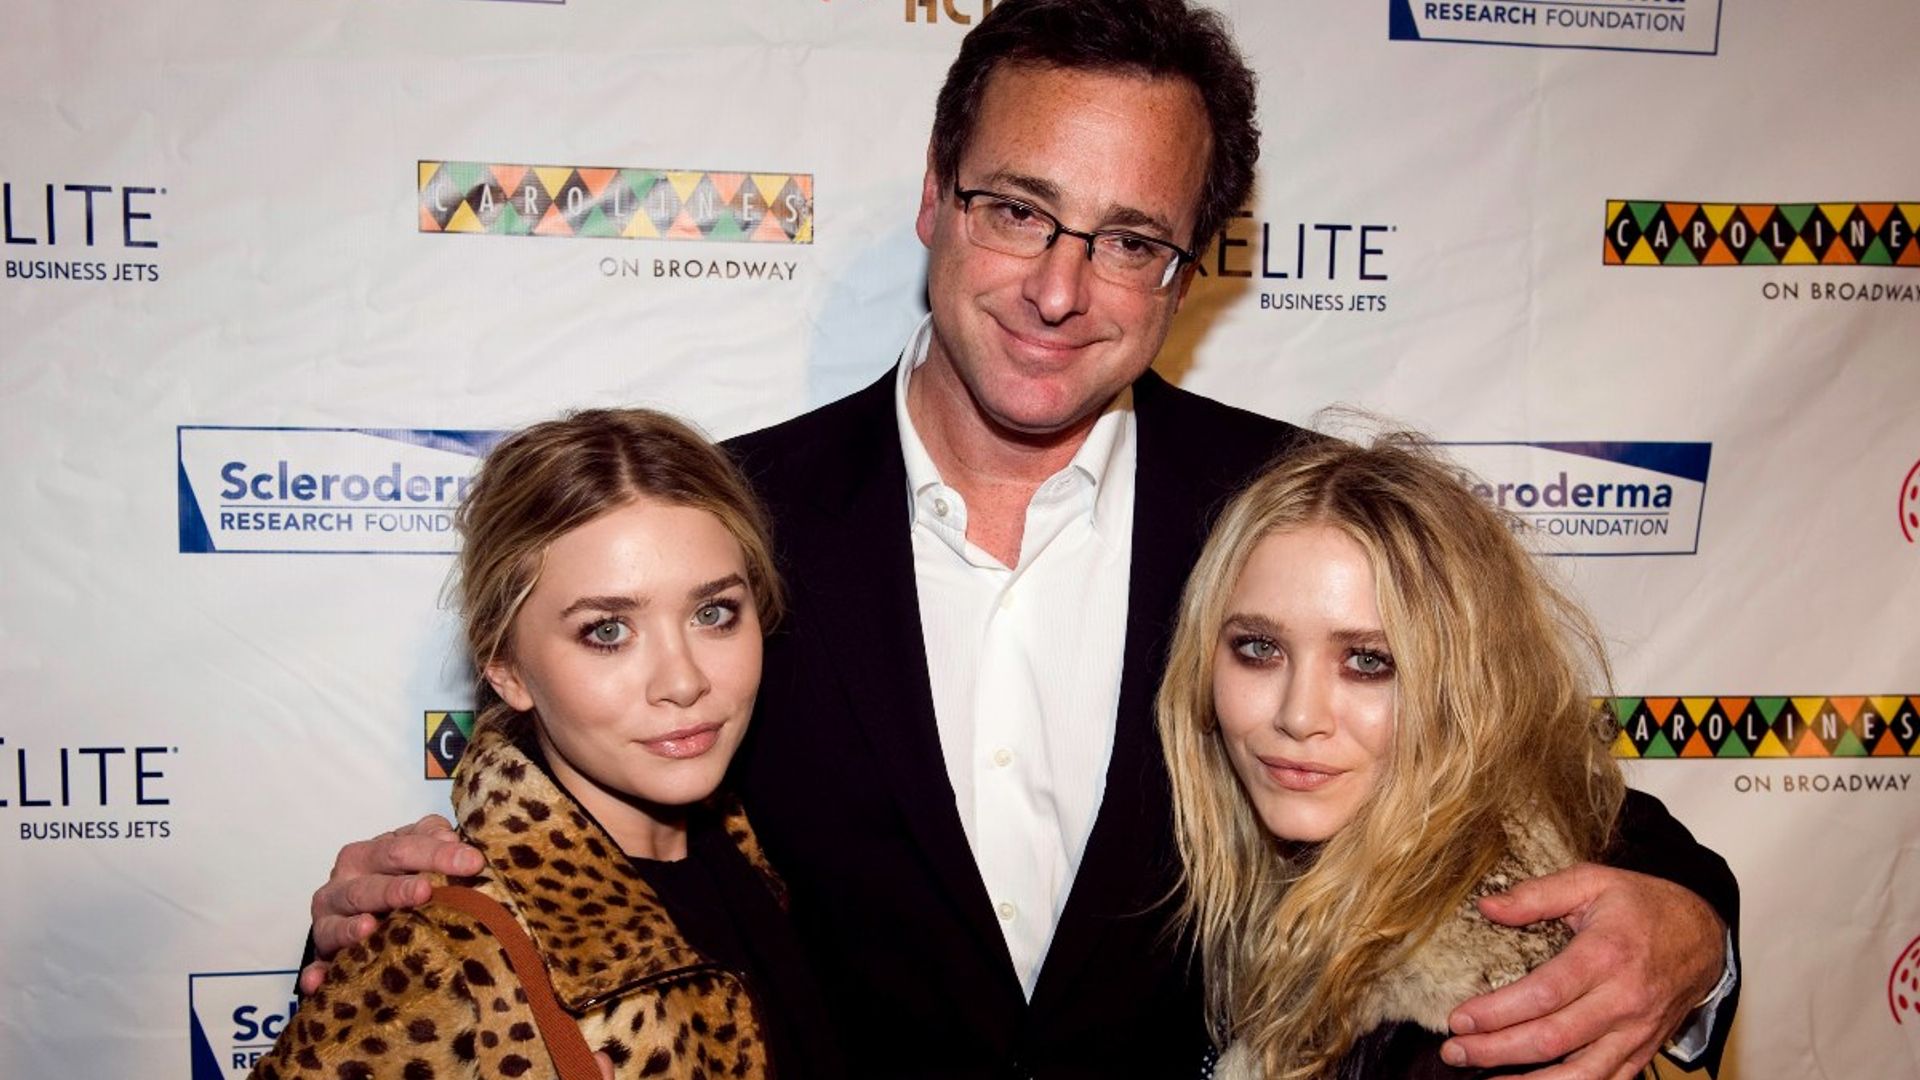 Mary-Kate and Ashley Olsen break silence following death of TV dad Bob Saget